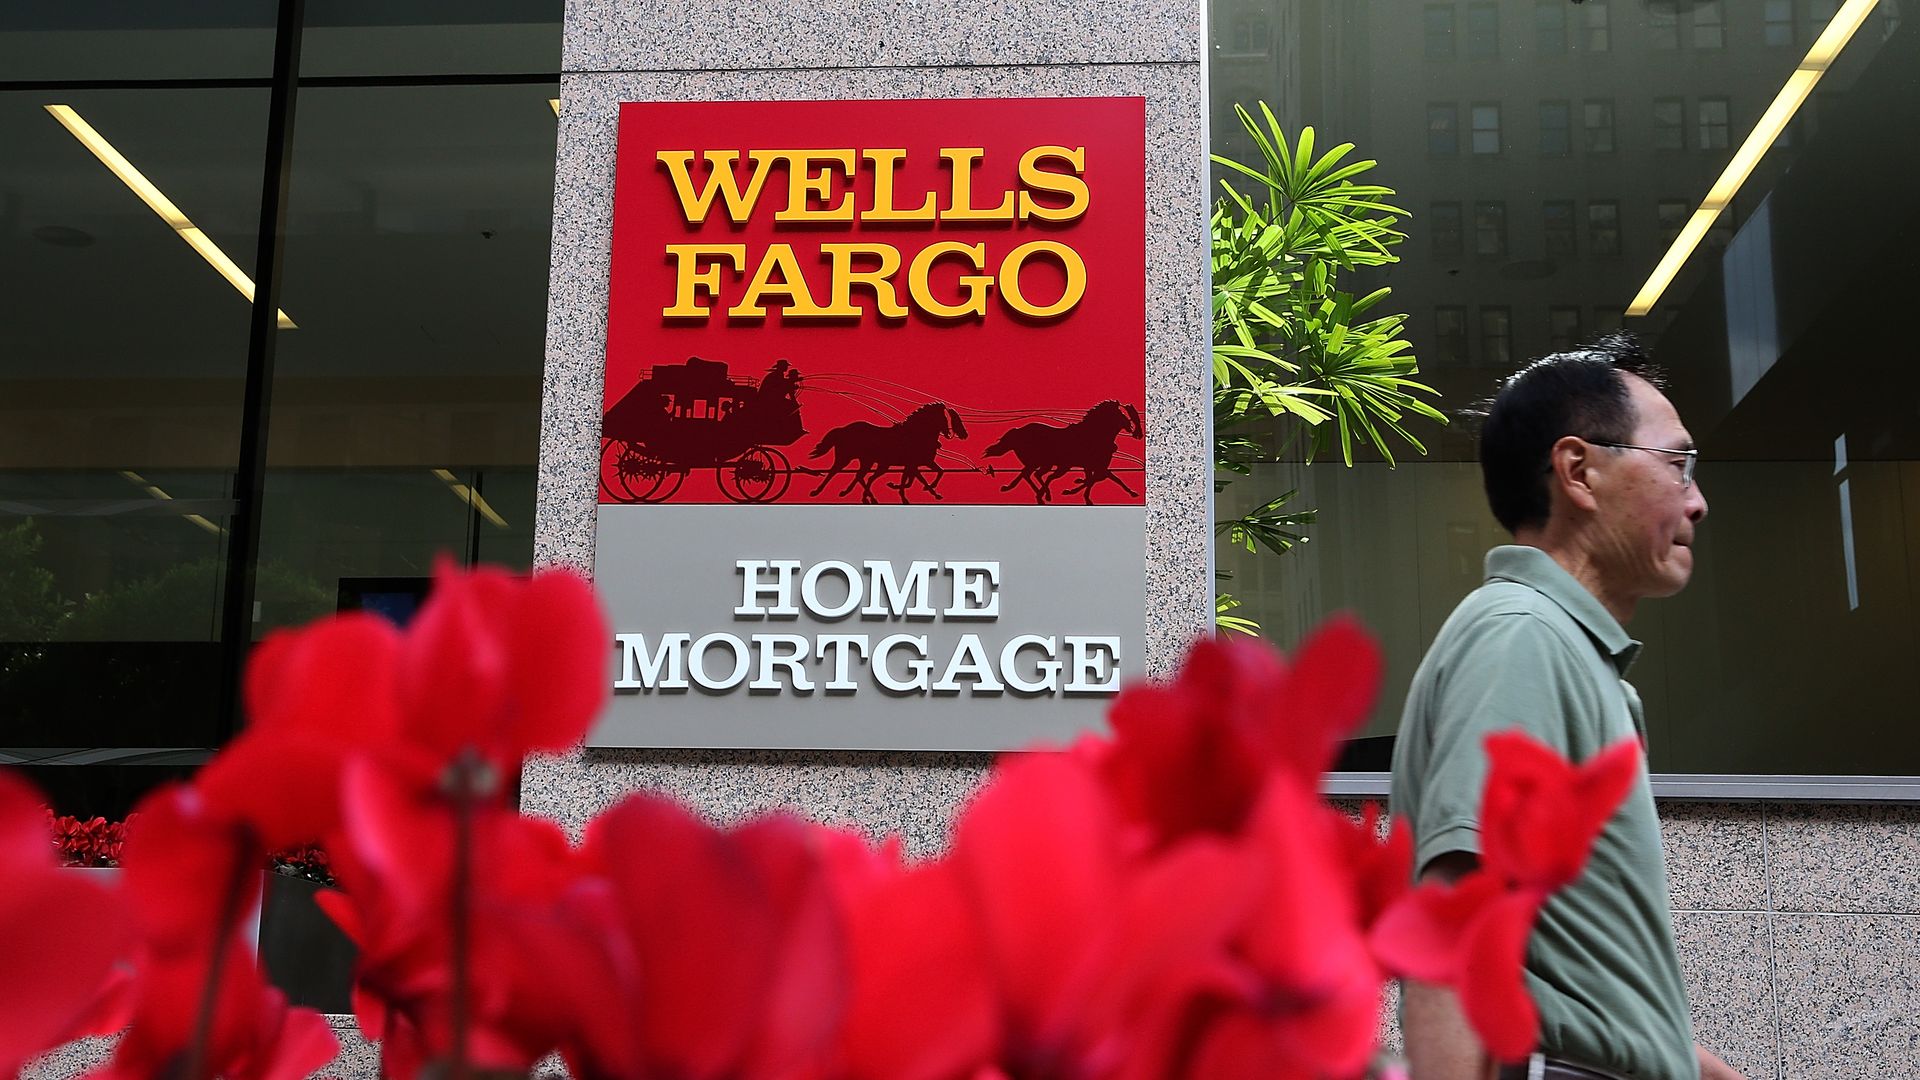 A Wells Fargo Home Mortgage sign 